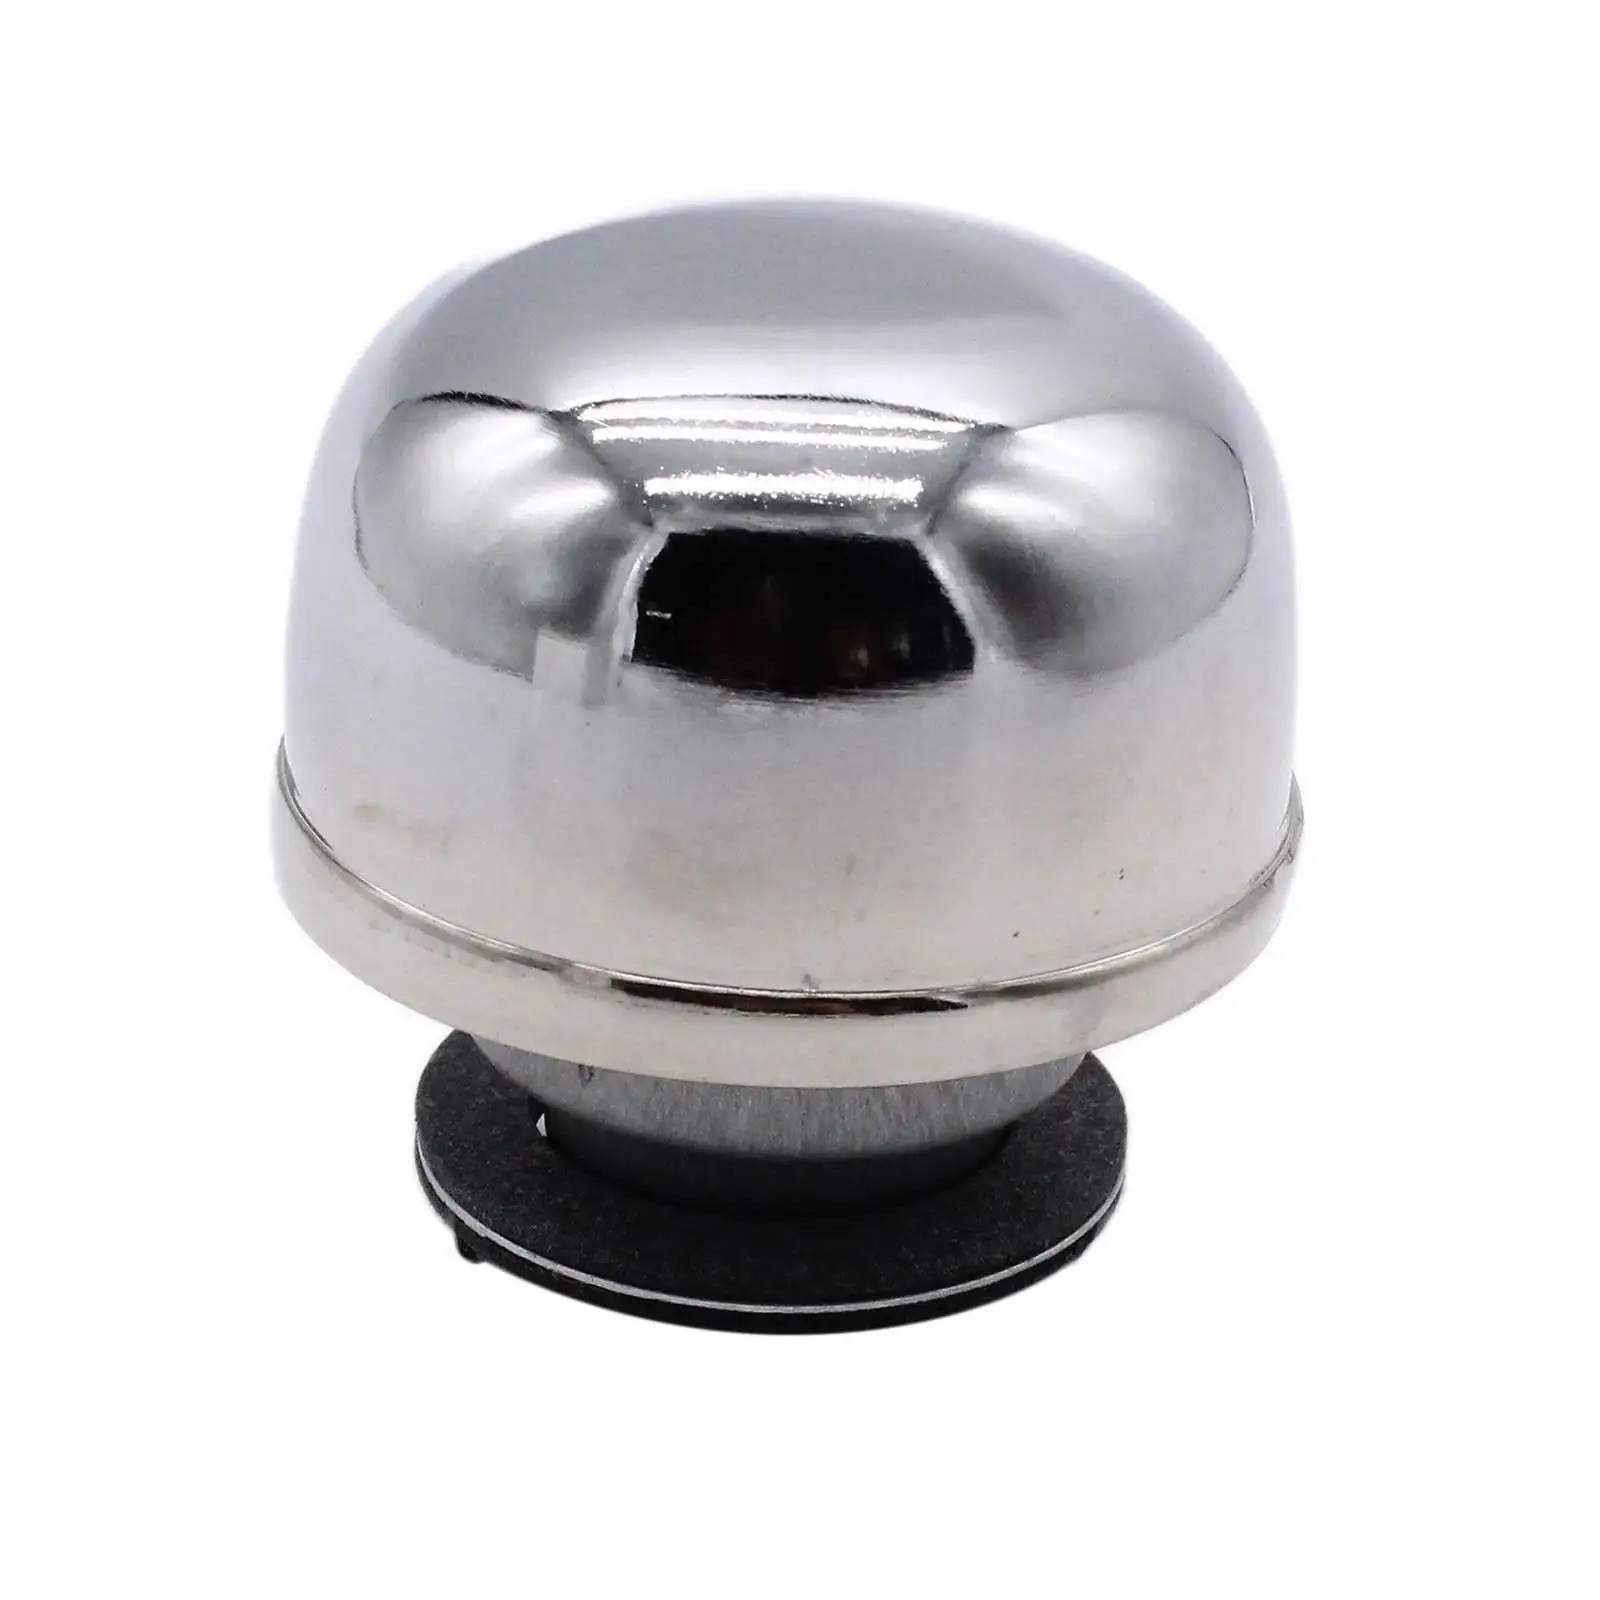 Oil Breather Cover Cover Chrome Fit for A26 Replace Spare Part